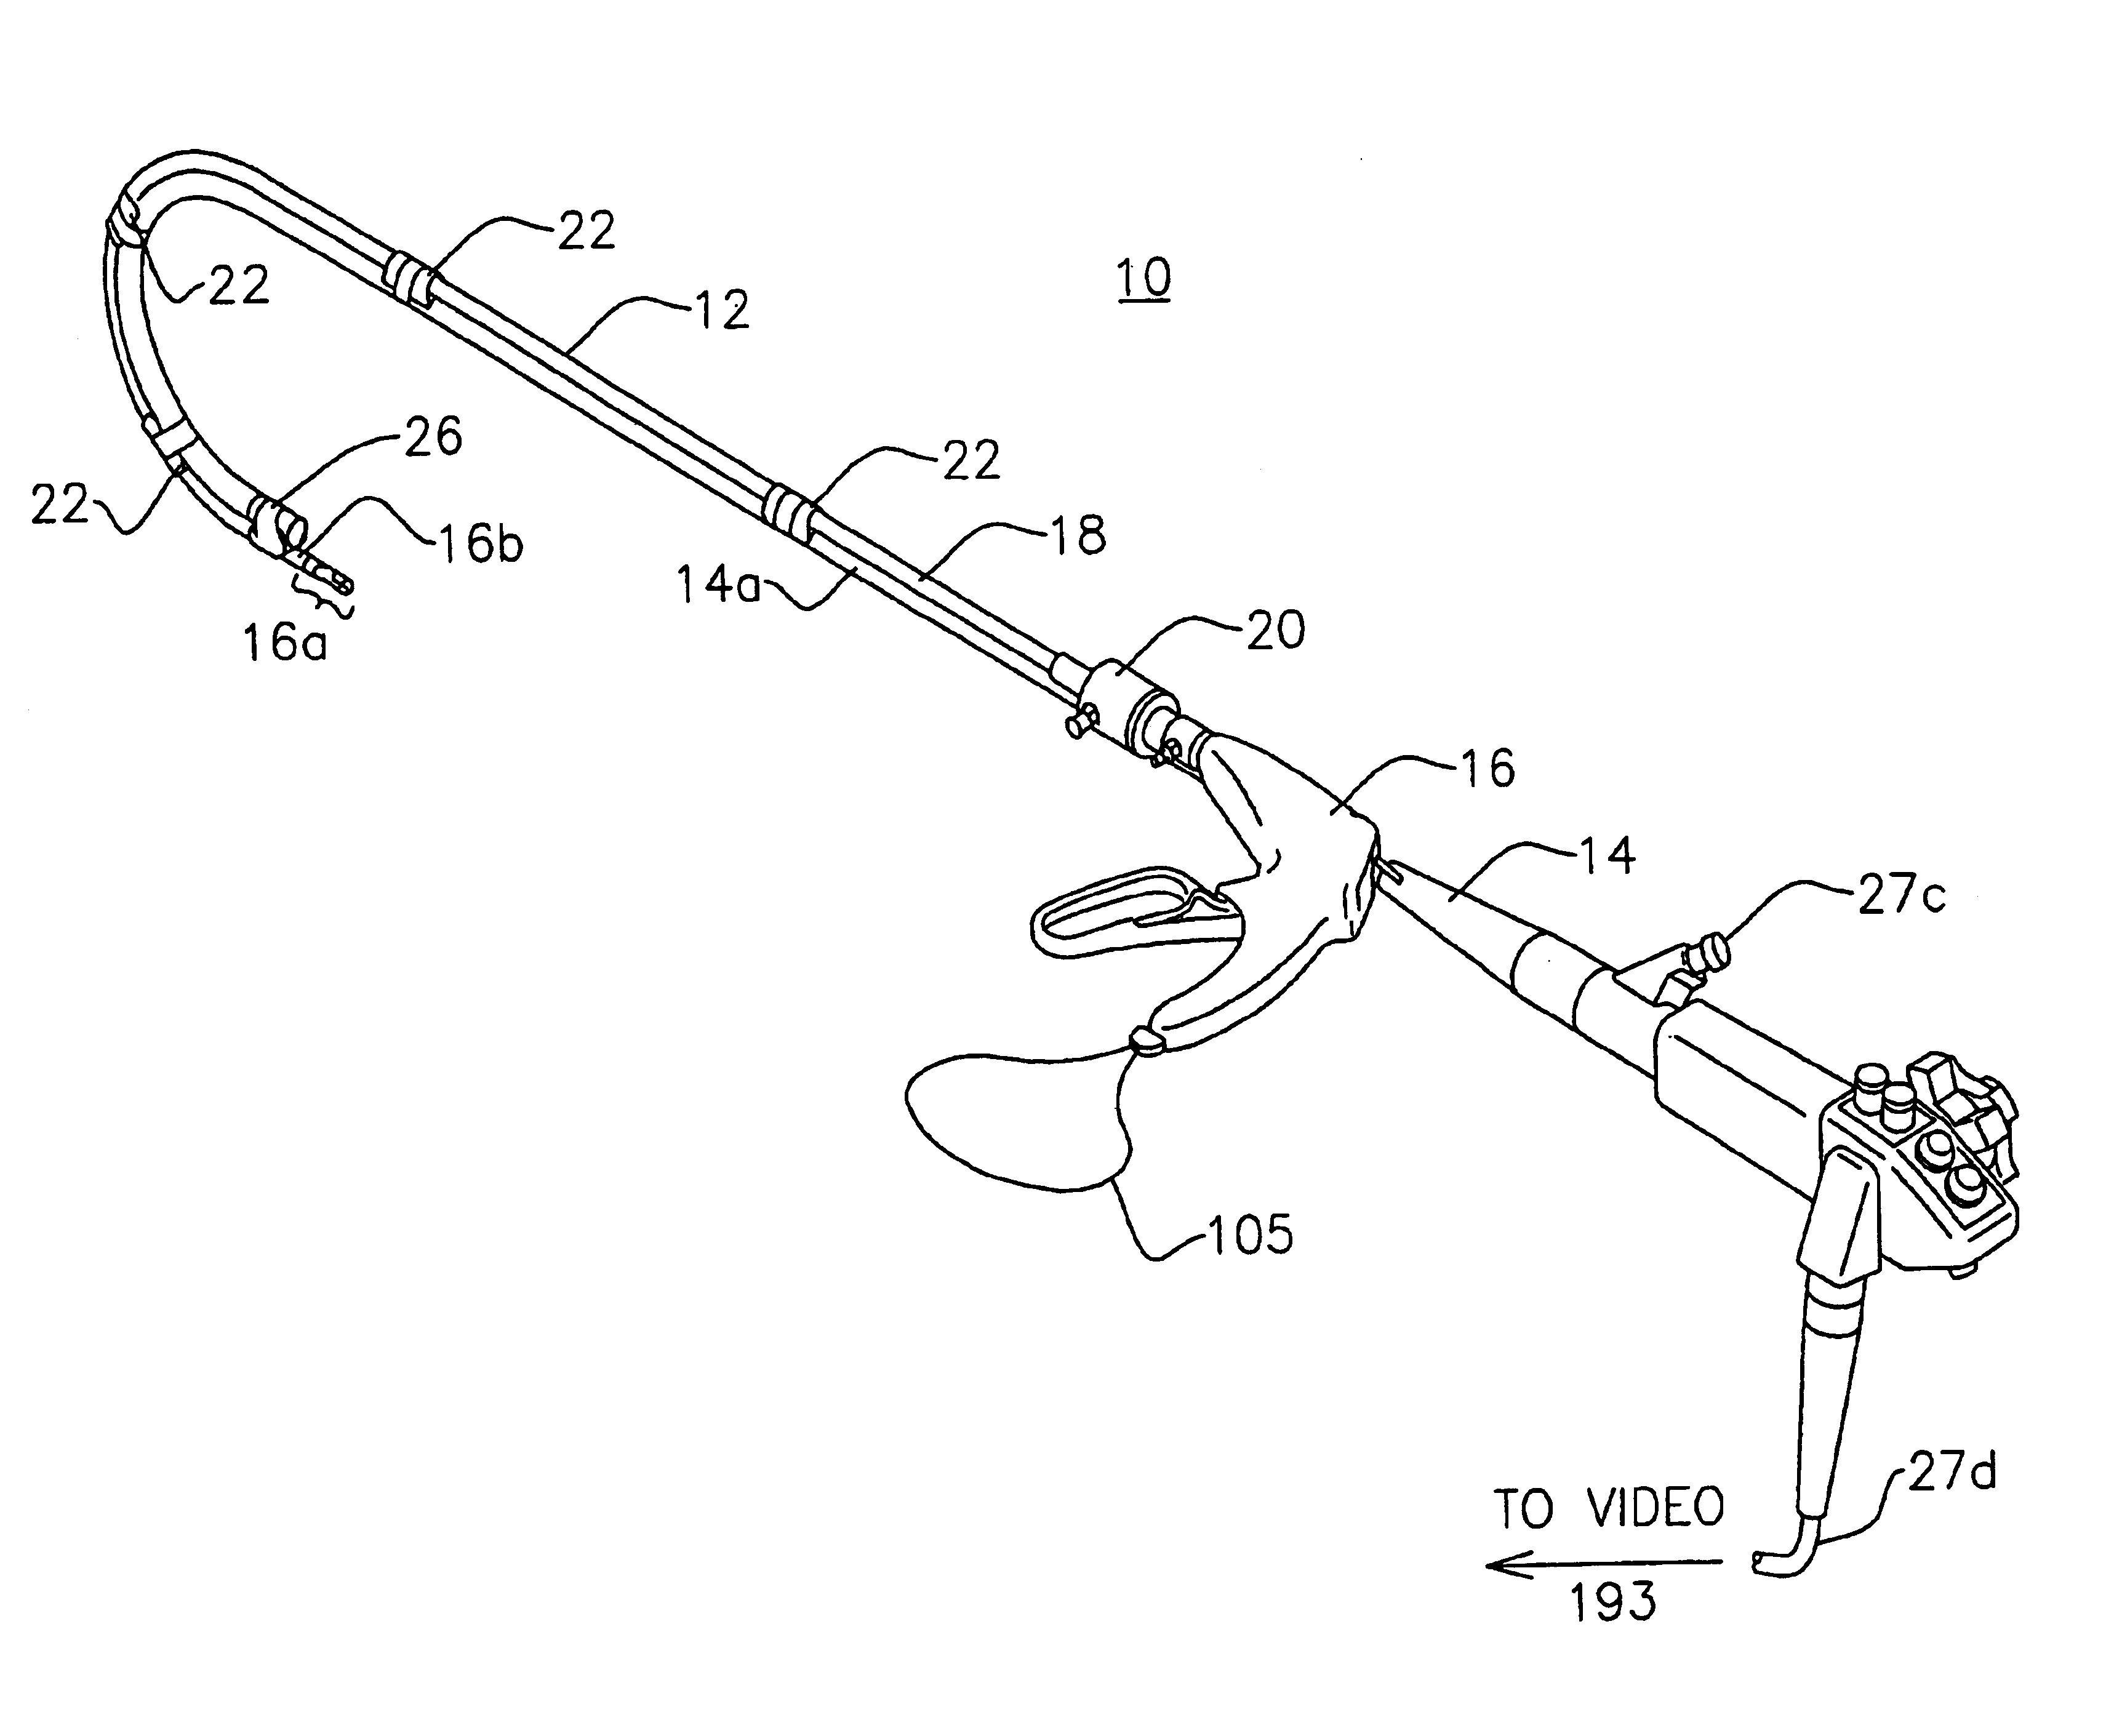 System for endoscopic suturing